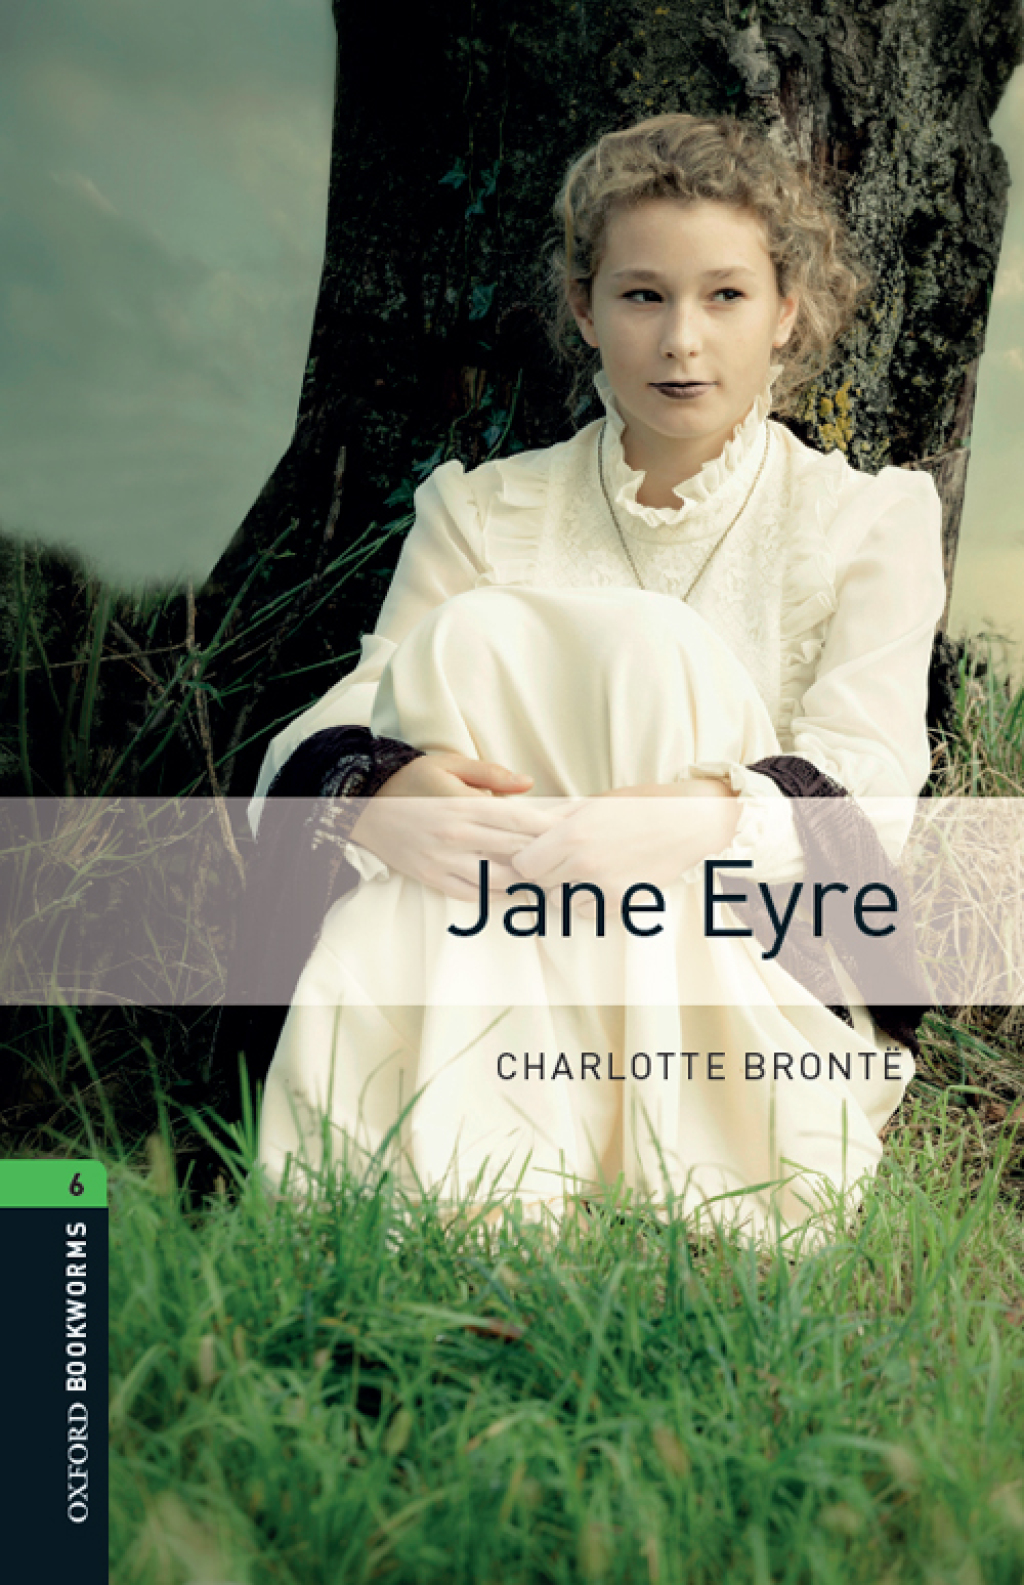 Jane Eyre Level 6 Oxford Bookworms Library - 3rd Edition (eBook Rental)